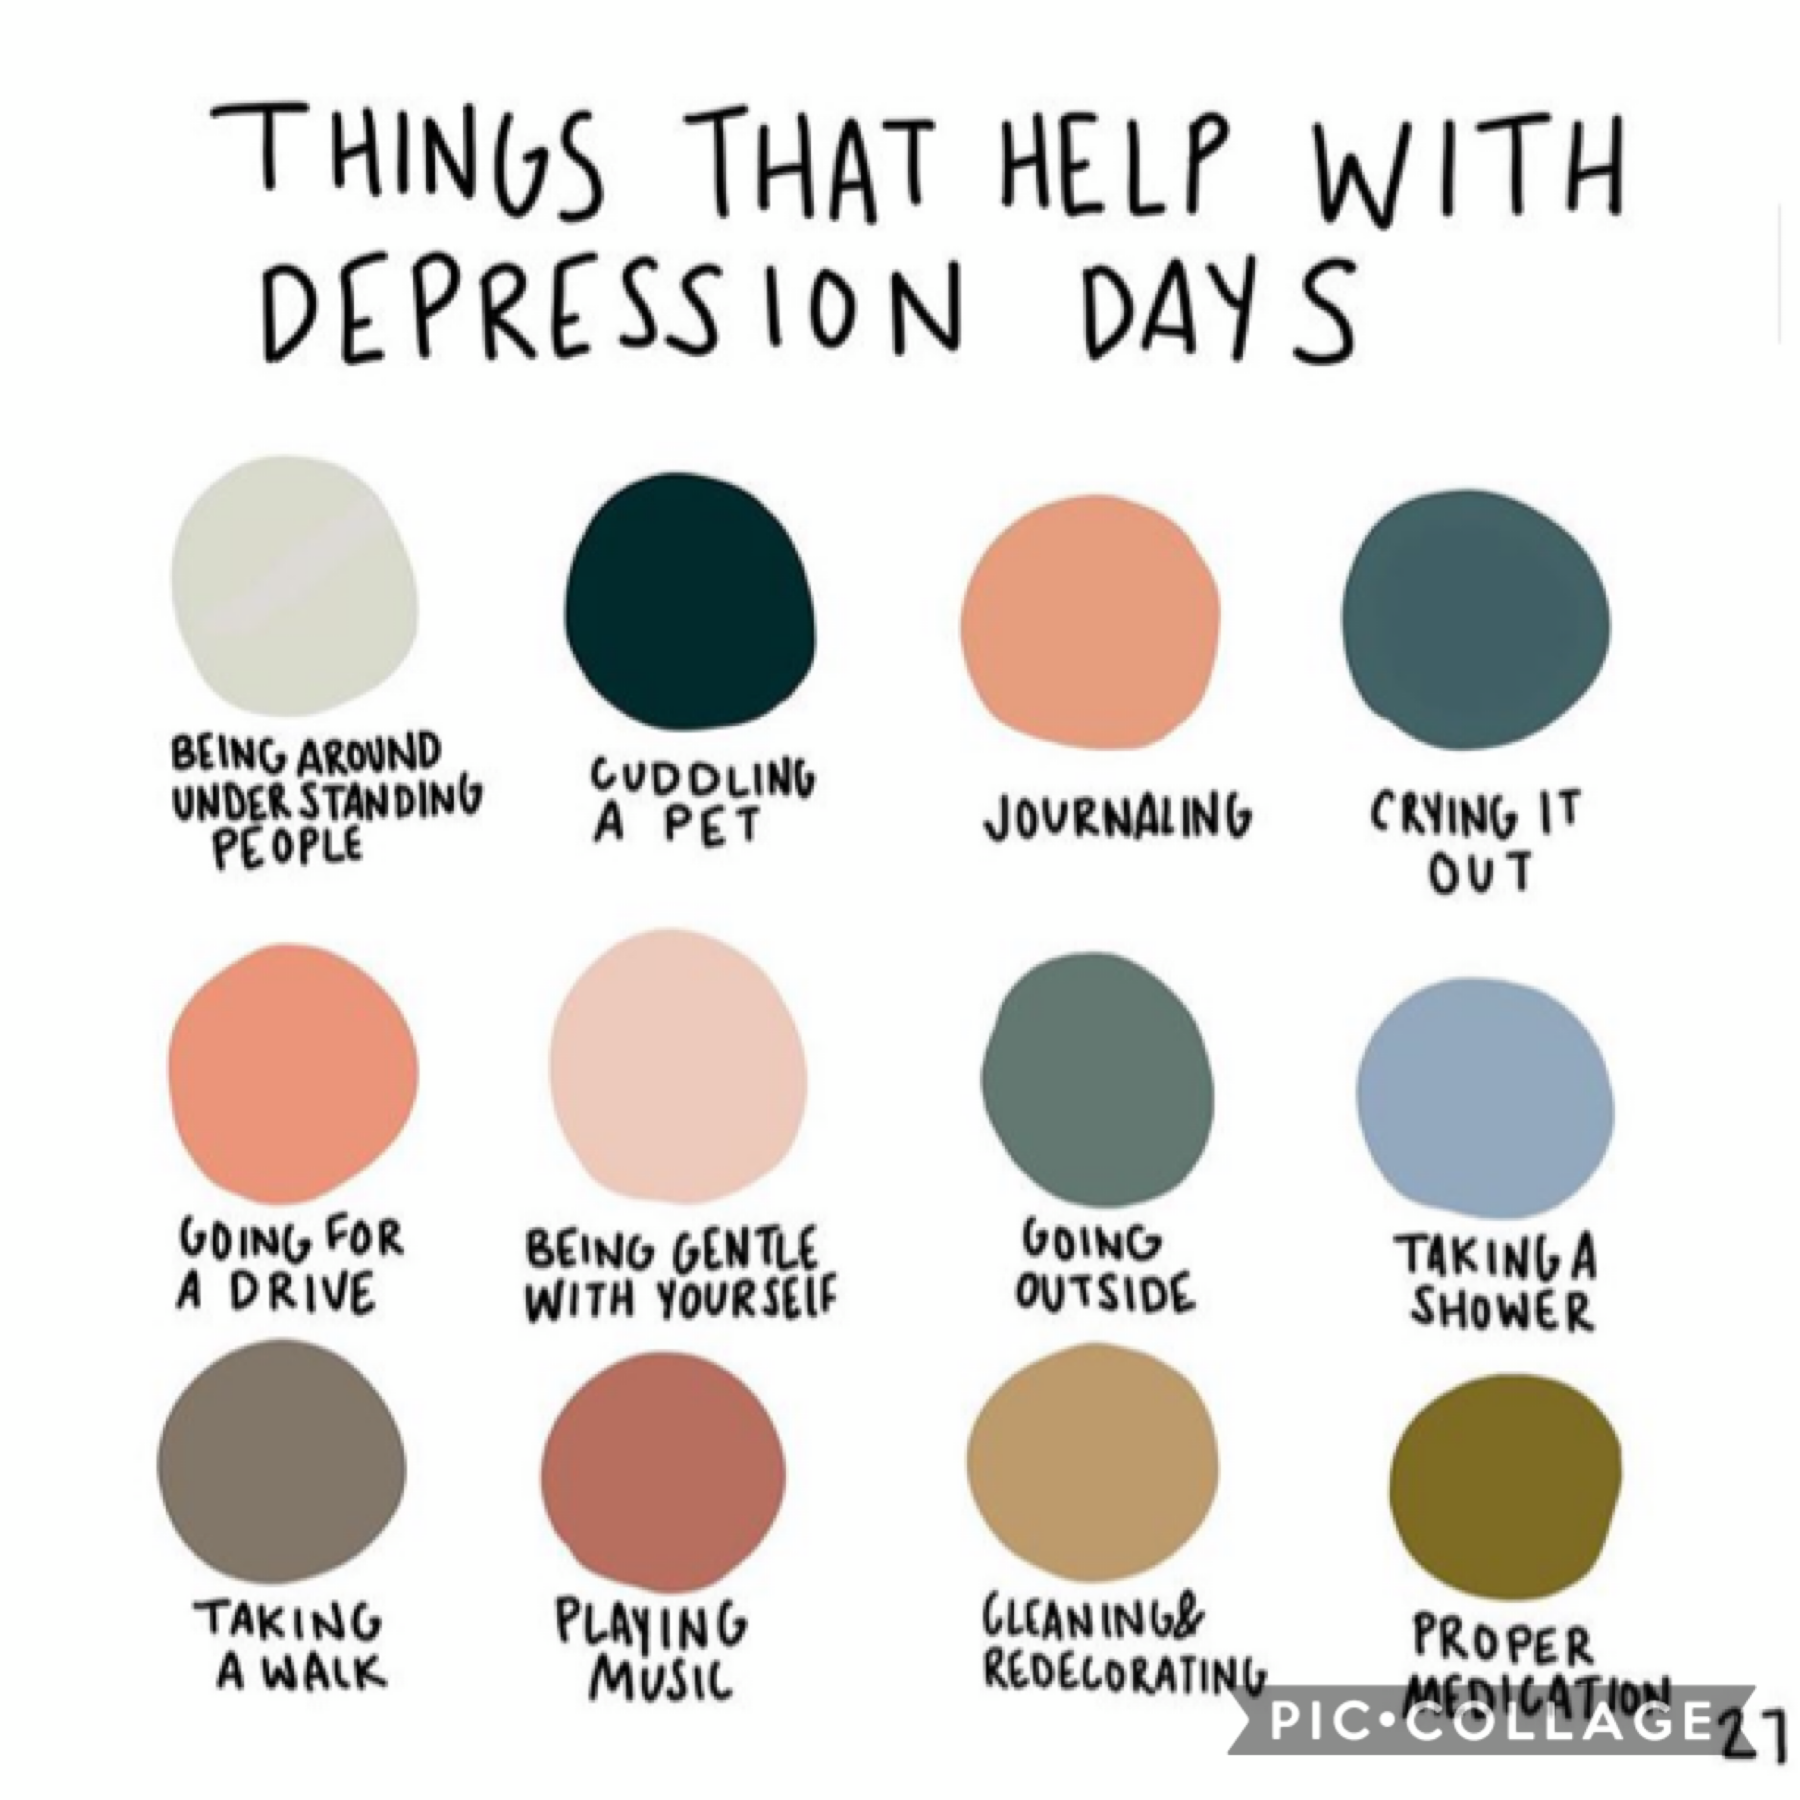 take a mental health day when you can! this something i’m working on, just normal hygiene and self-care. somedays it may be a challenge so take that time to take care of yourself! it’s okay to have bad days, just keep going and know that better things are